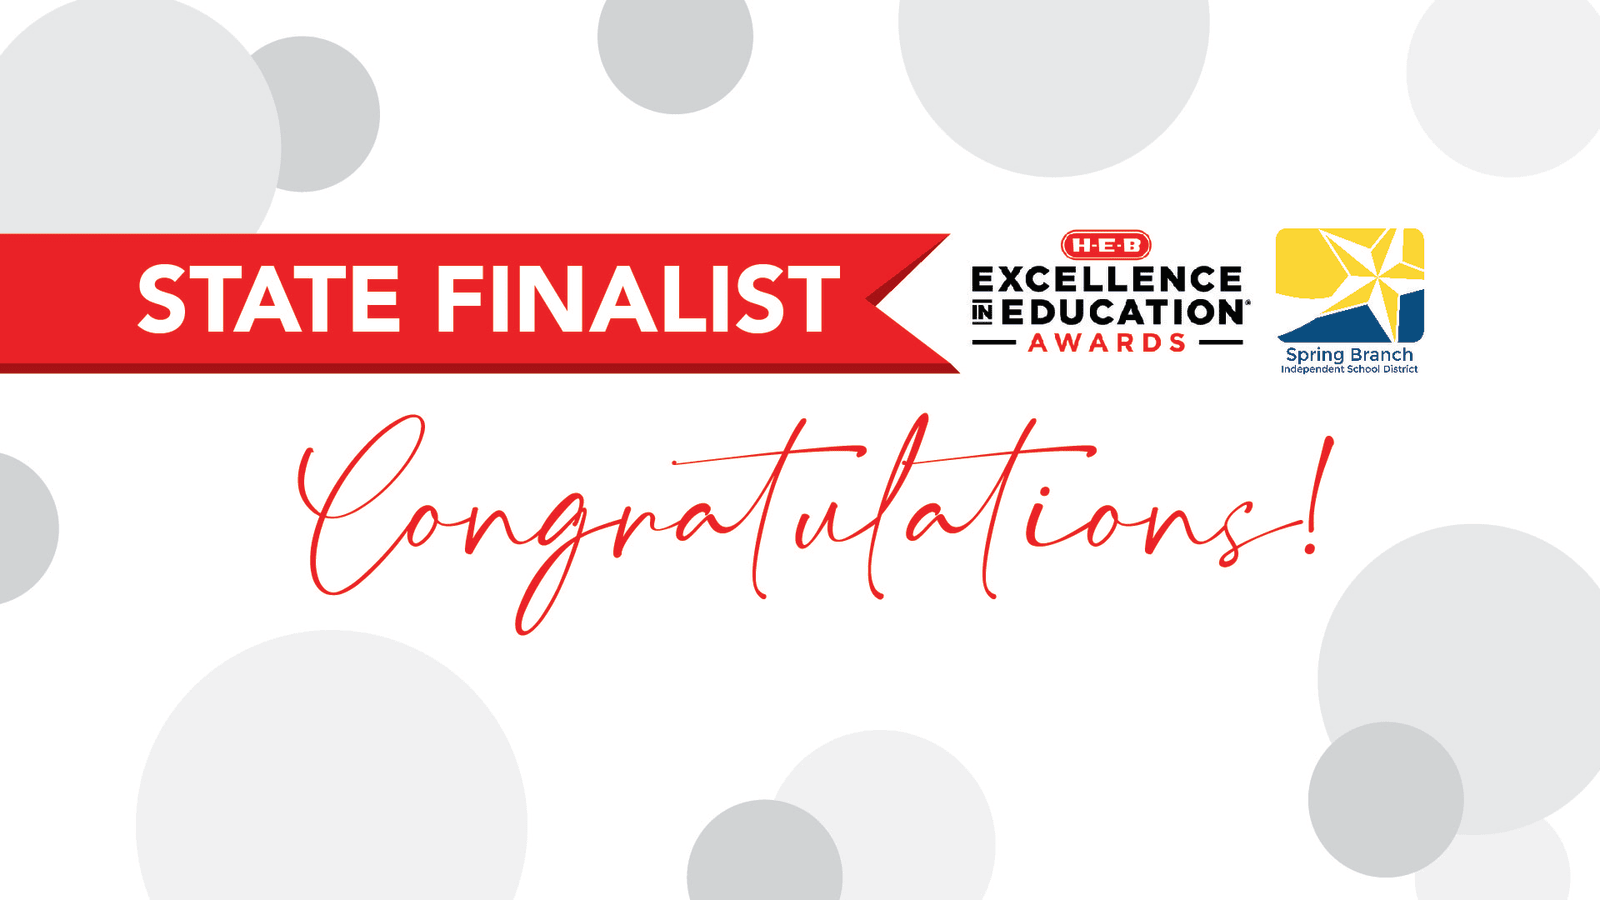 Spring Branch ISD Selected as a State Finalist for the H-E-B Excellence in Education Award